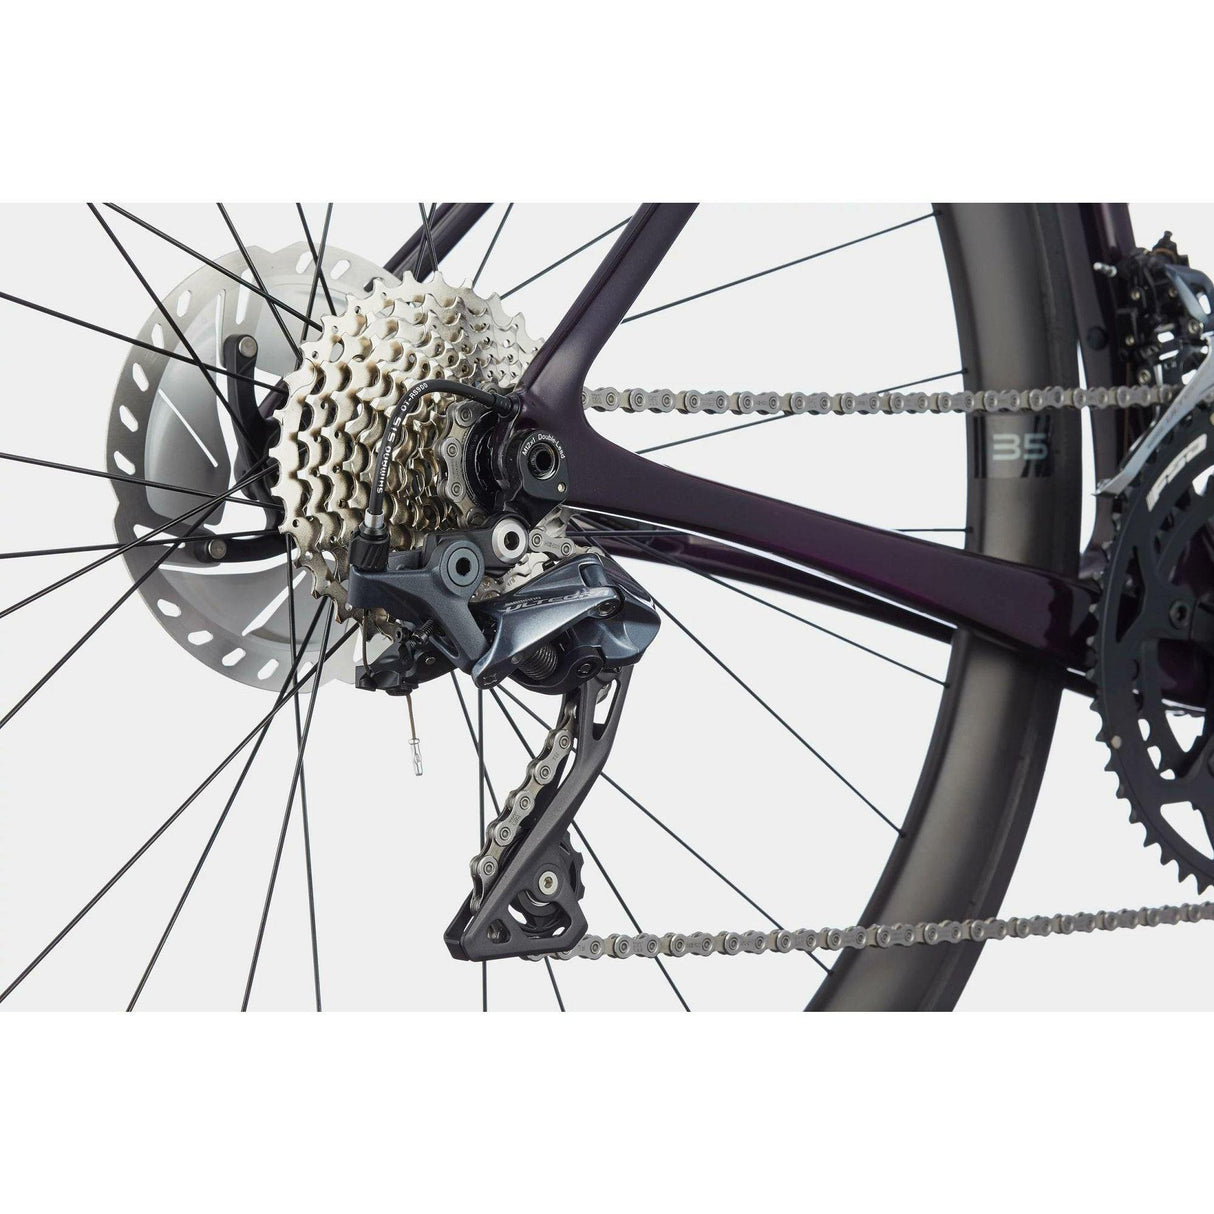 Cannondale SuperSix EVO Carbon Disc Ultegra | Strictly Bicycles